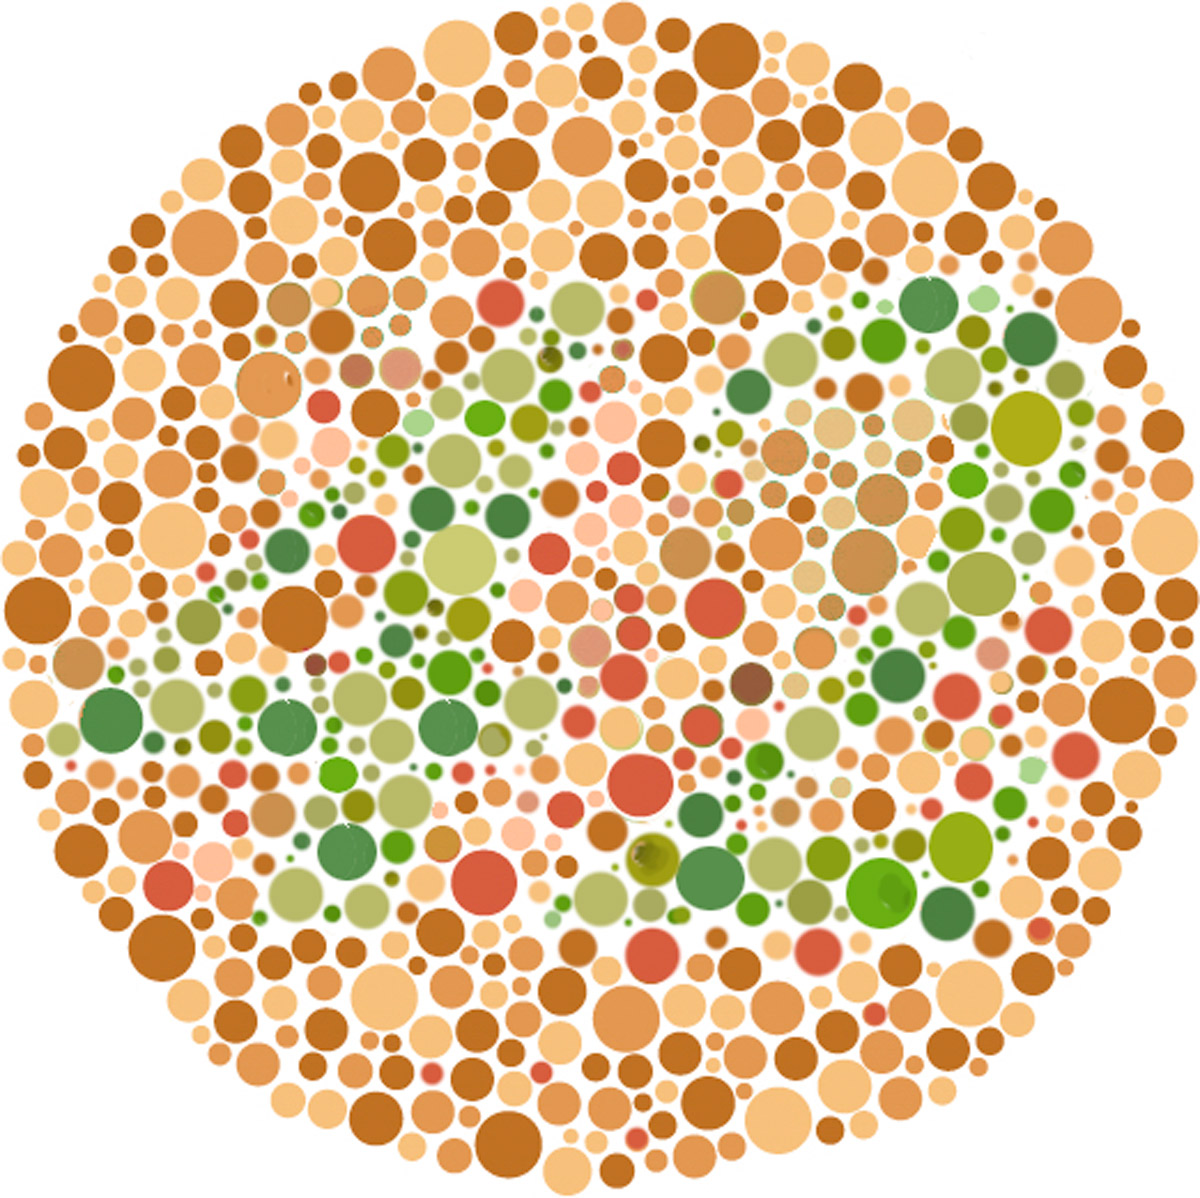 Are you Color Blind? | SiOWfa16: Science in Our World: Certainty and ...